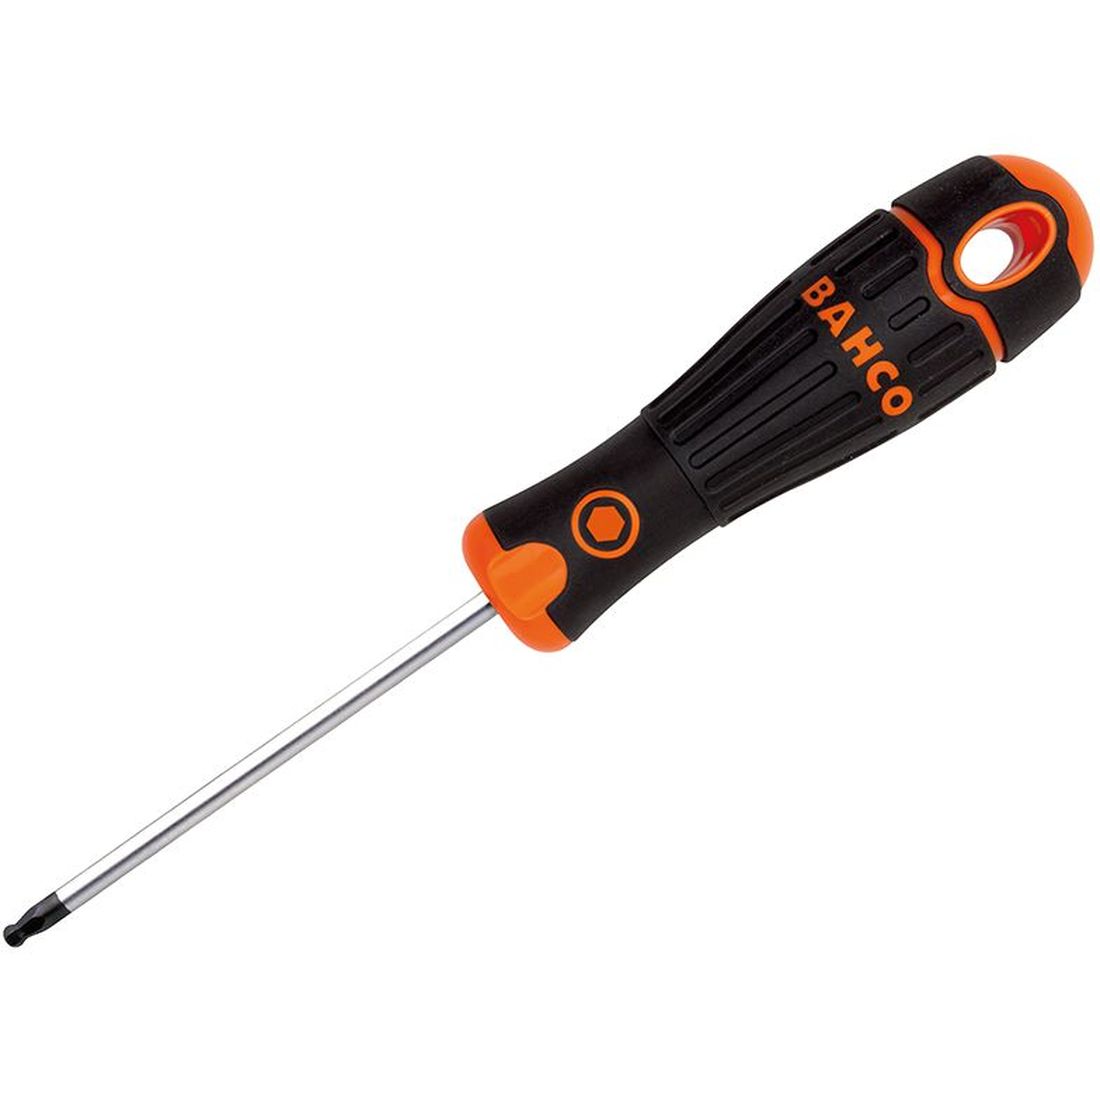 Bahco BAHCOFIT Screwdriver Hex Ball End 3.0 x 100mm                                   